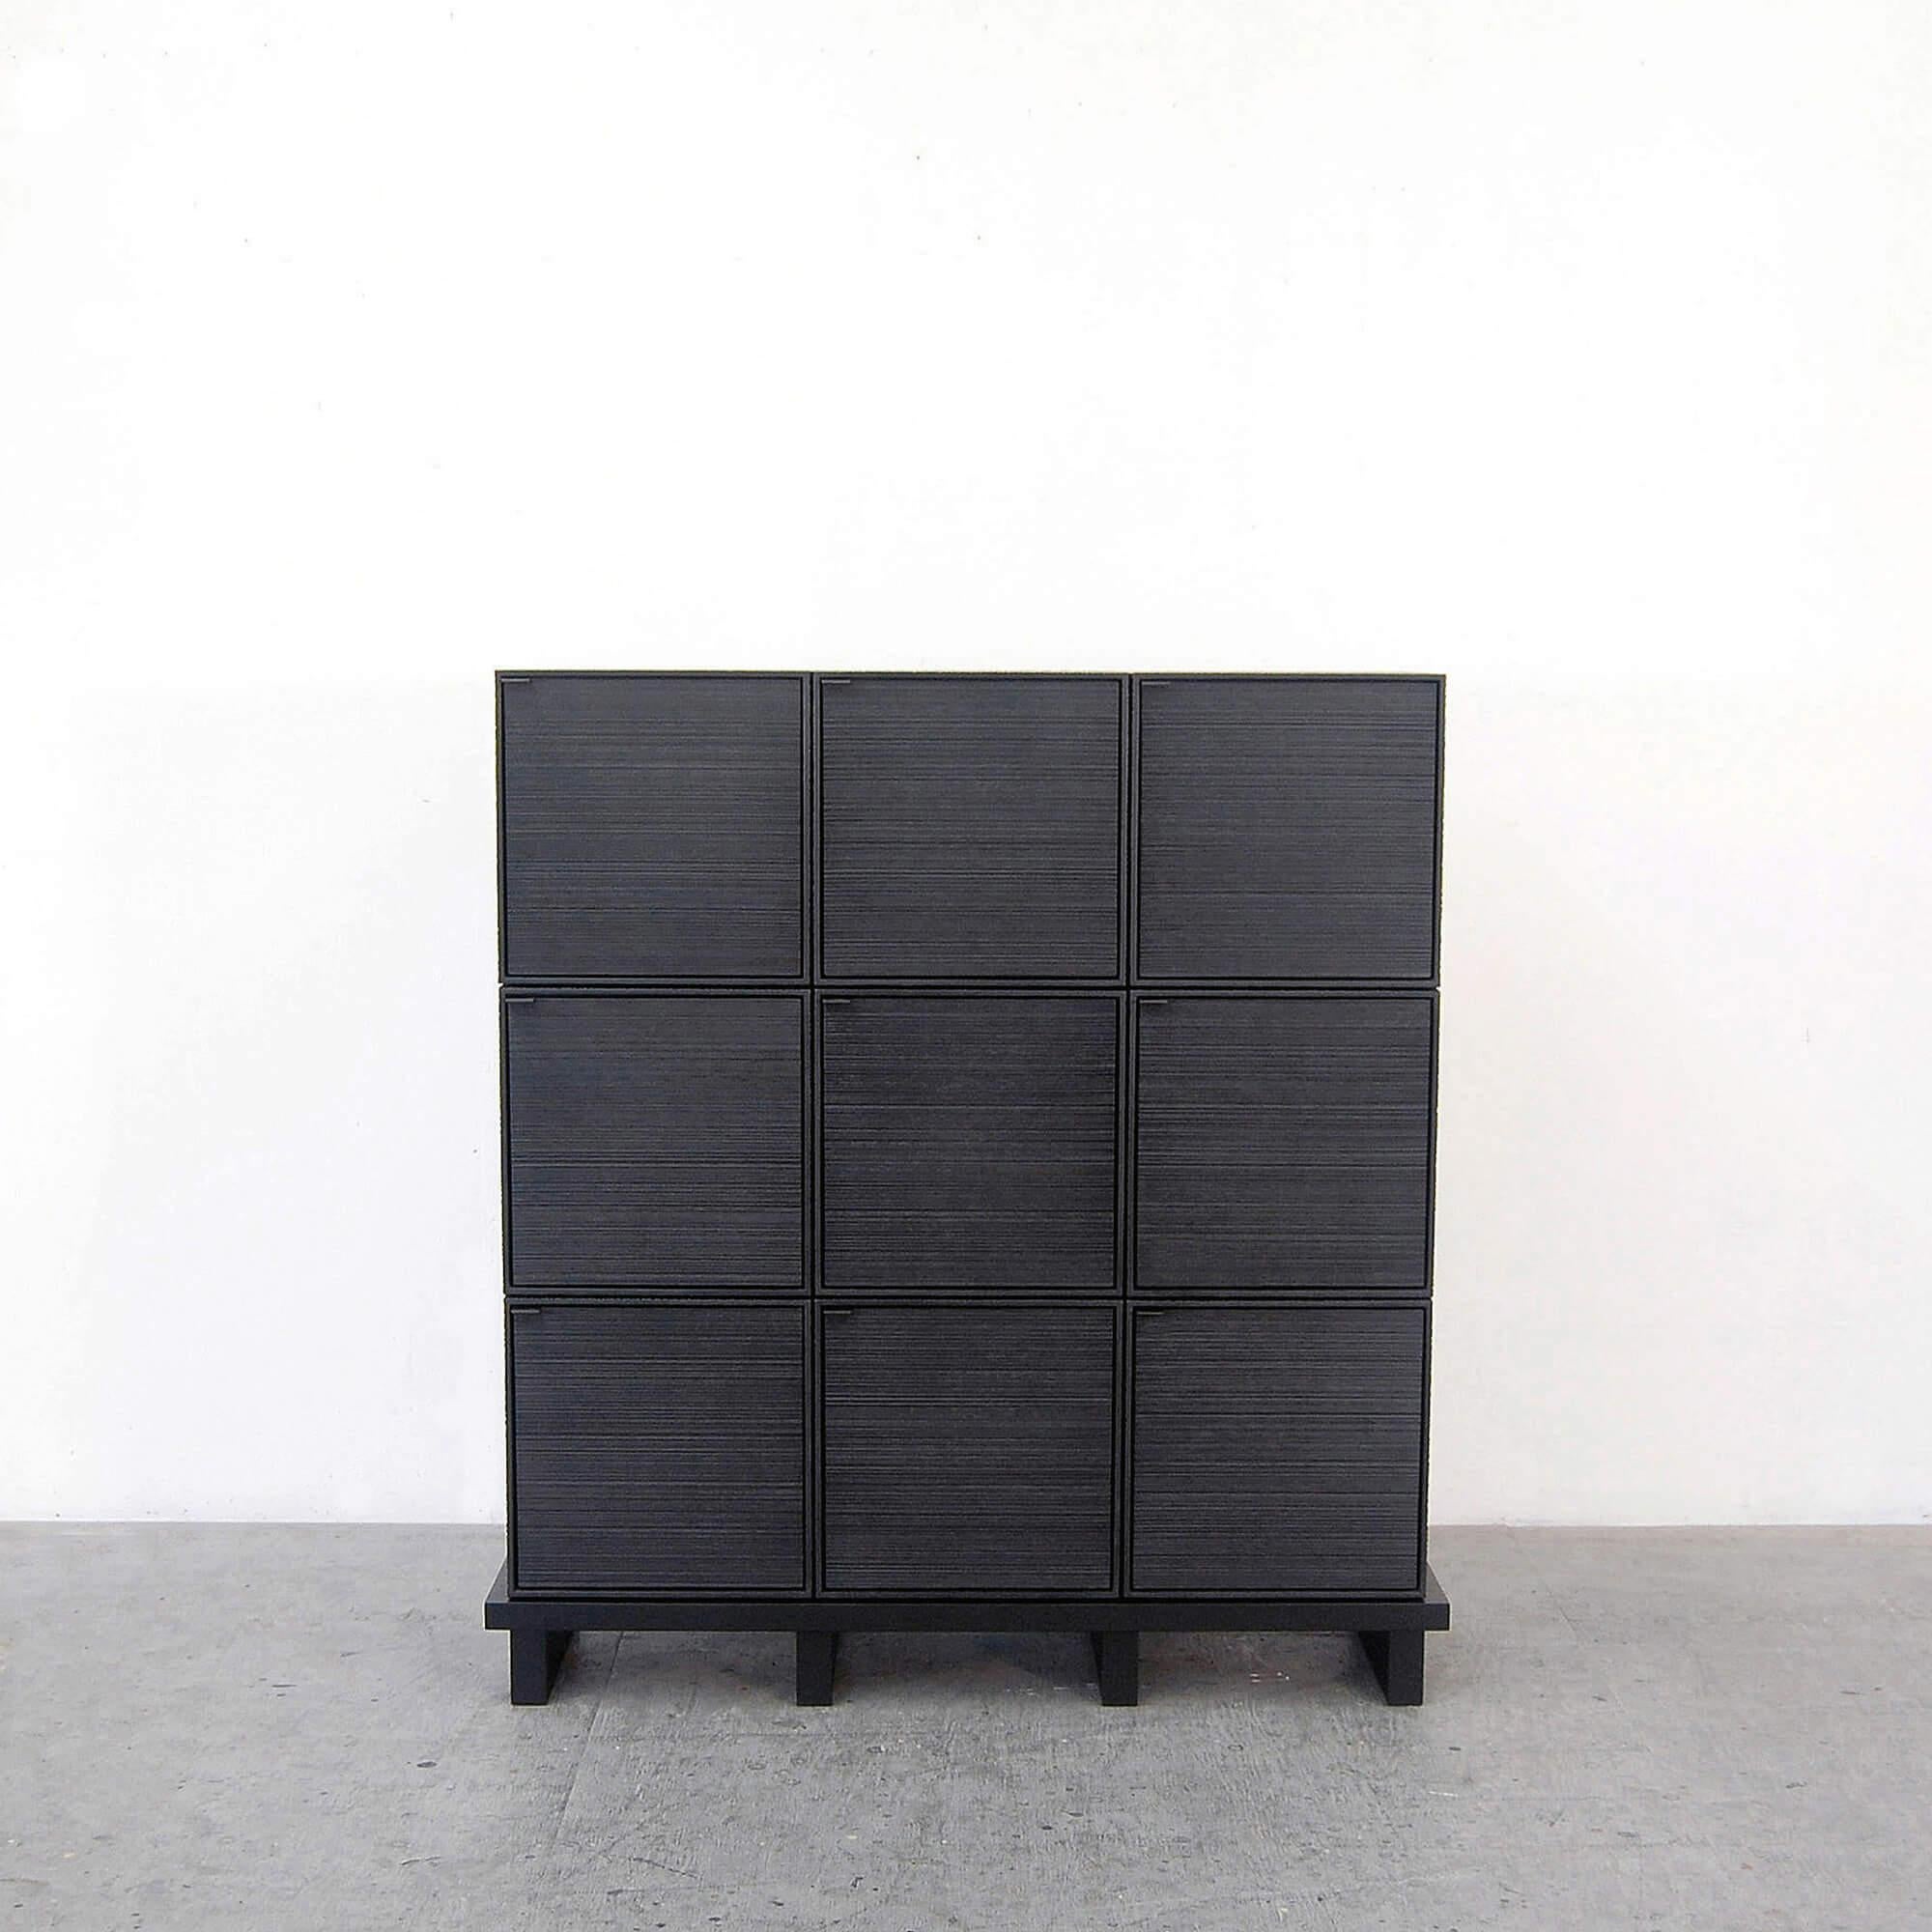 This monolithic cabinet from John Eric Byers merges bold, modern geometries with traditional craft. The wood is hand-sawn and lacquered with a distinctive textured pattern to give a sophisticated finish to a simplified silhouette.

John Eric Byers